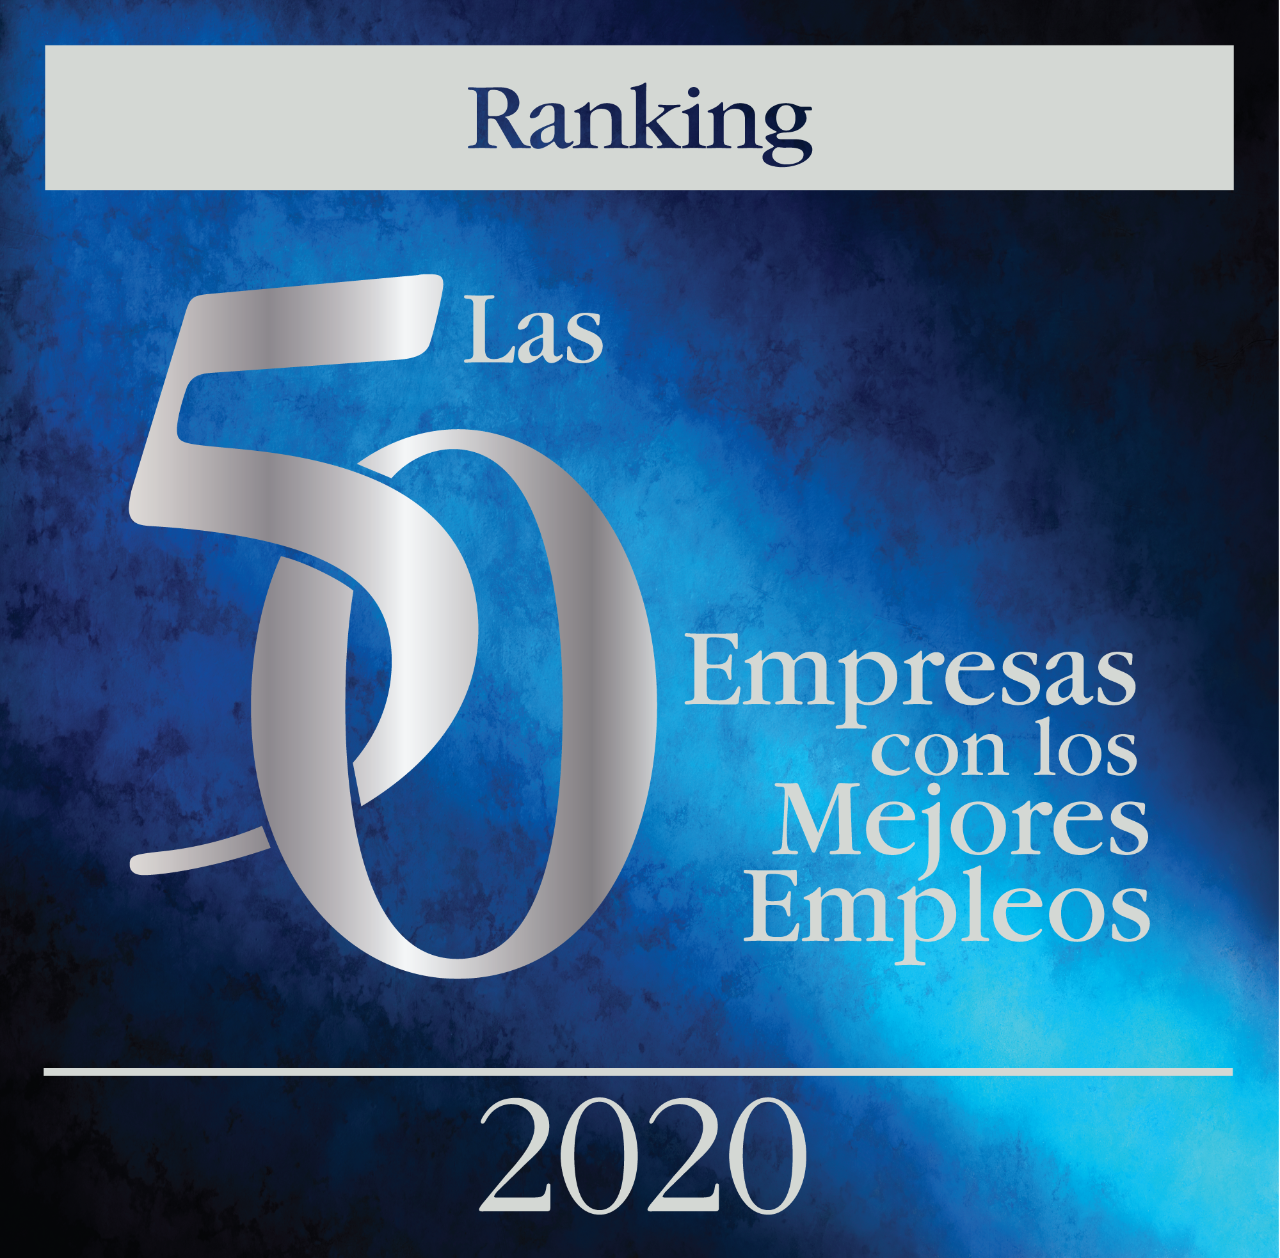 Responsible Healthy Organization and Best Mentoring Company, Mexico 2018